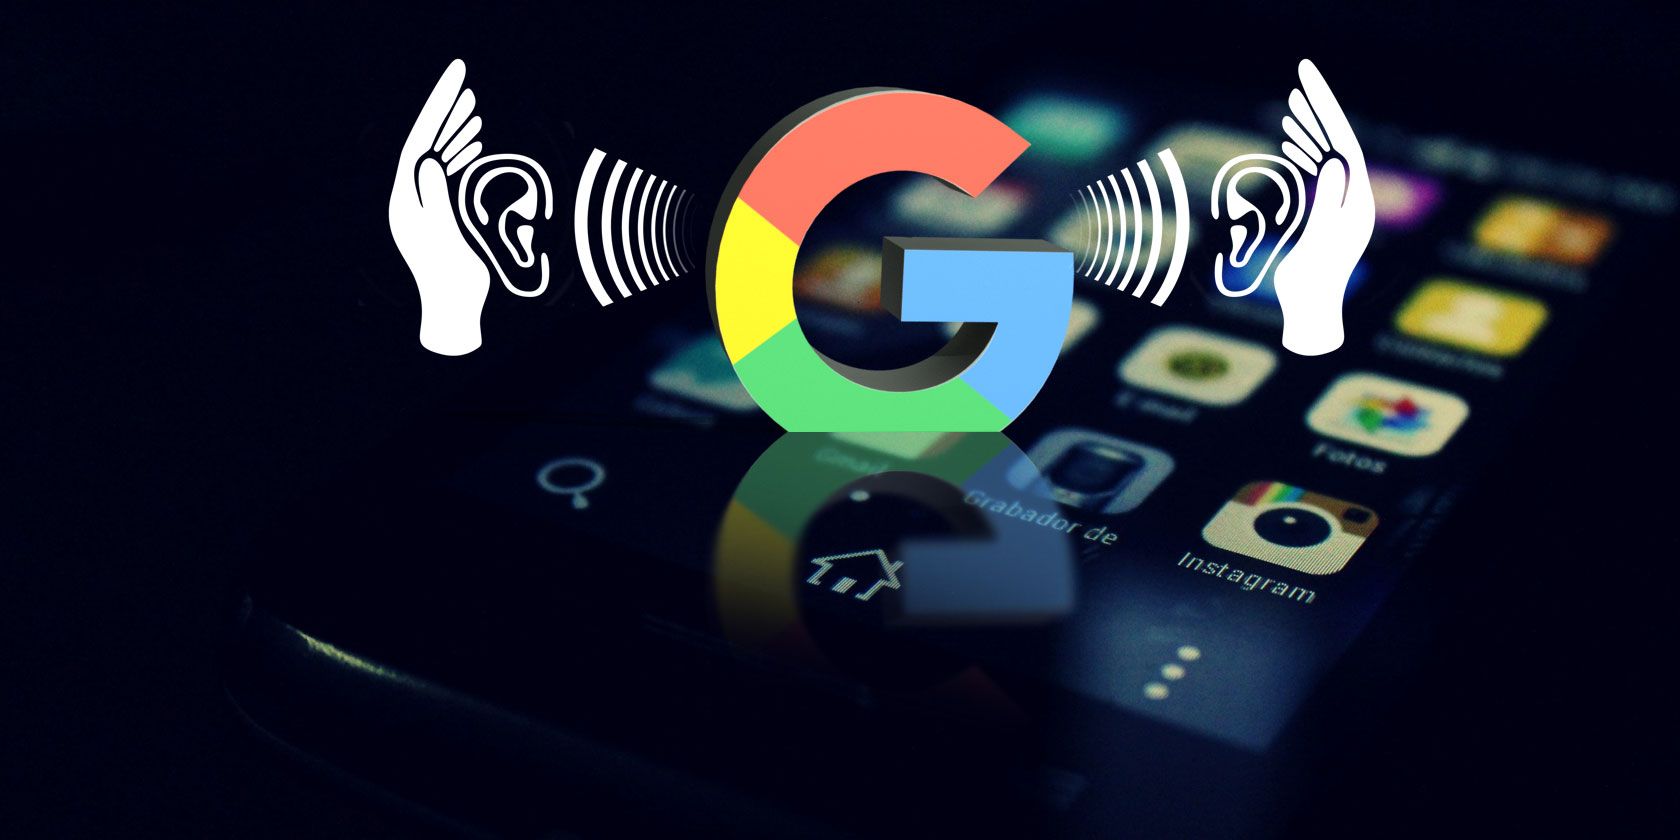 Google logo with sound waves, ears, and hands coming out of a smartphone